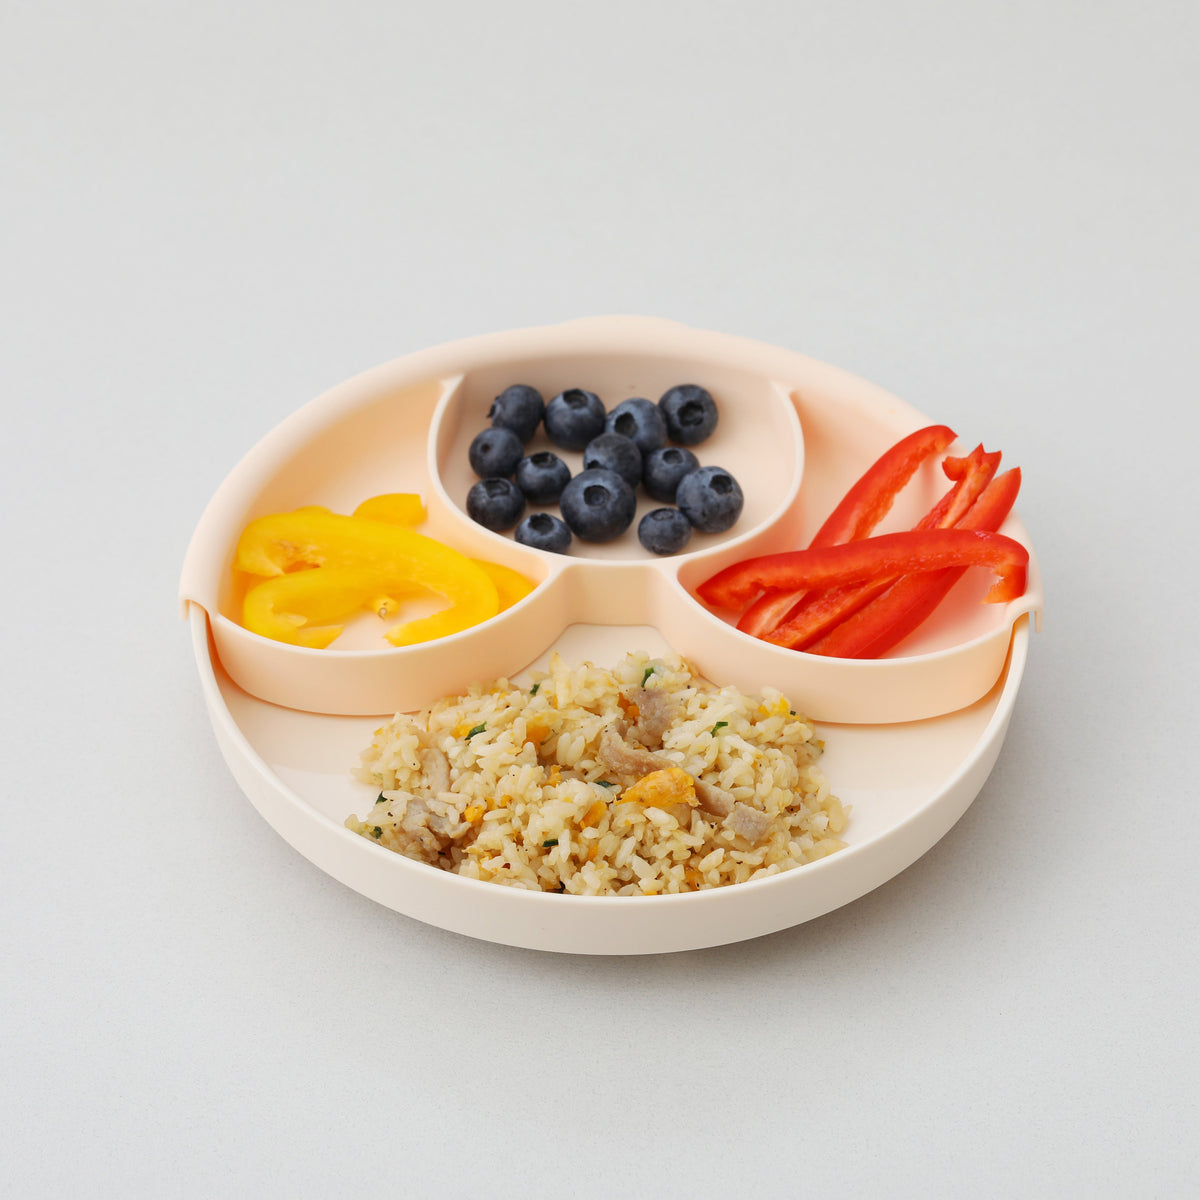 miniware-healthy-meal-set-pla-smart-divider-suction-plate-in-vanilla-+-silicone-divider-in-peach- (31)